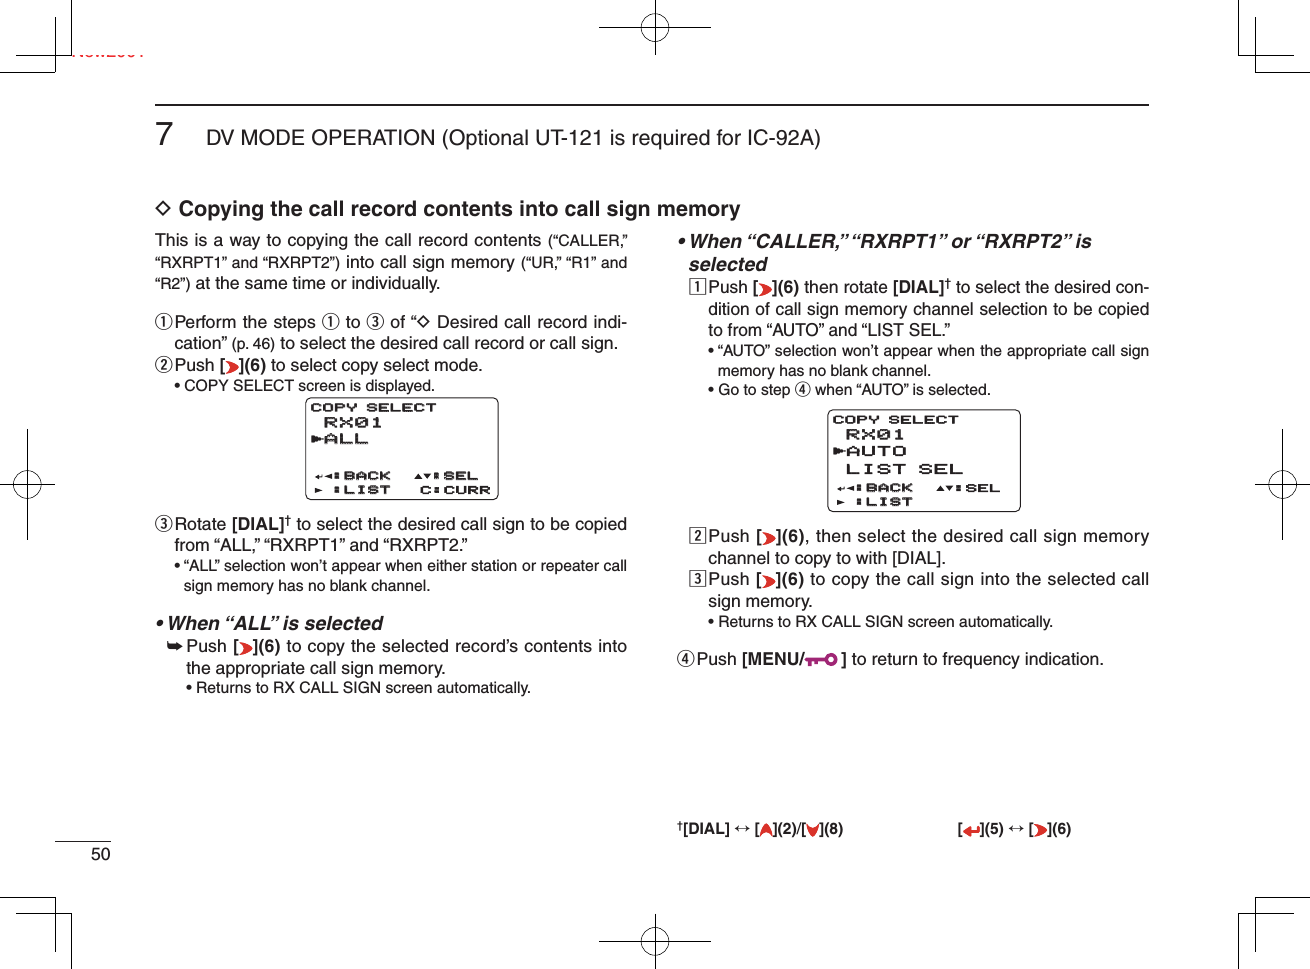 Ne507DV MODE OPERATION (Optional UT-121 is required for IC-92A)New2001D Copying the call record contents into call sign memoryThis is a way to copying the call record contents (“CALLER,” “RXRPT1” and “RXRPT2”) into call sign memory (“UR,” “R1” and “R2”) at the same time or individually. q  Perform the steps q to e of “D Desired call record indi-cation” (p. 46) to select the desired call record or call sign.w Push  [](6) to select copy select mode.  • COPY SELECT screen is displayed.e  Rotate [DIAL]† to select the desired call sign to be copied from “ALL,” “RXRPT1” and “RXRPT2.”•  “ALL” selection won’t appear when either station or repeater call sign memory has no blank channel.• When “ALL” is selected➥  Push [](6) to copy the selected record’s contents into the appropriate call sign memory.• Returns to RX CALL SIGN screen automatically.•  When “CALLER,” “RXRPT1” or “RXRPT2” is selectedz  Push [ ](6) then rotate [DIAL]† to select the desired con-dition of call sign memory channel selection to be copied to from “AUTO” and “LIST SEL.”•  “AUTO” selection won’t appear when the appropriate call sign memory has no blank channel.• Go to step r when “AUTO” is selected.x  Push [](6), then select the desired call sign memory channel to copy to with [DIAL].c  Push [](6) to copy the call sign into the selected call sign memory.• Returns to RX CALL SIGN screen automatically.r Push  [MENU/ ] to return to frequency indication.†[DIAL] ↔ [ ](2)/[](8) [ ](5) ↔ [ ](6)RX01RX01ALLALL:BACK:BACK:LIST:LIST C:CURRCOPY SELECTCOPY SELECT:SEL:SELrRX01RX01AUTOLIST SEL:BACK:BACK:LIST:LISTCOPY SELECT:SELr